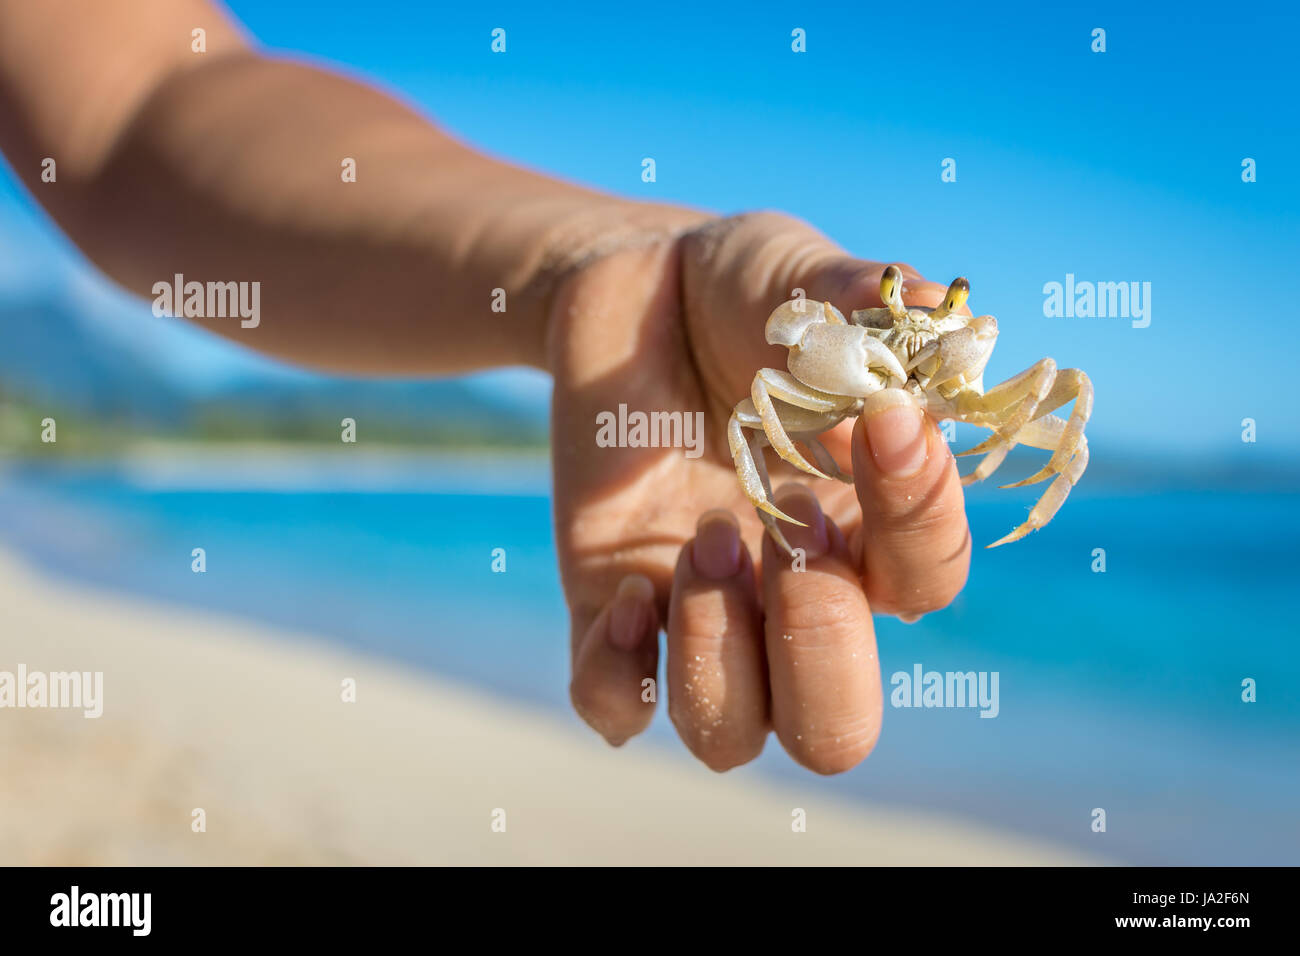 A white Ghost Crab with protruding eyes makes a funny face after being caught by hand at Waimanalo Beach on the island of Oahu, Hawaii. Stock Photo